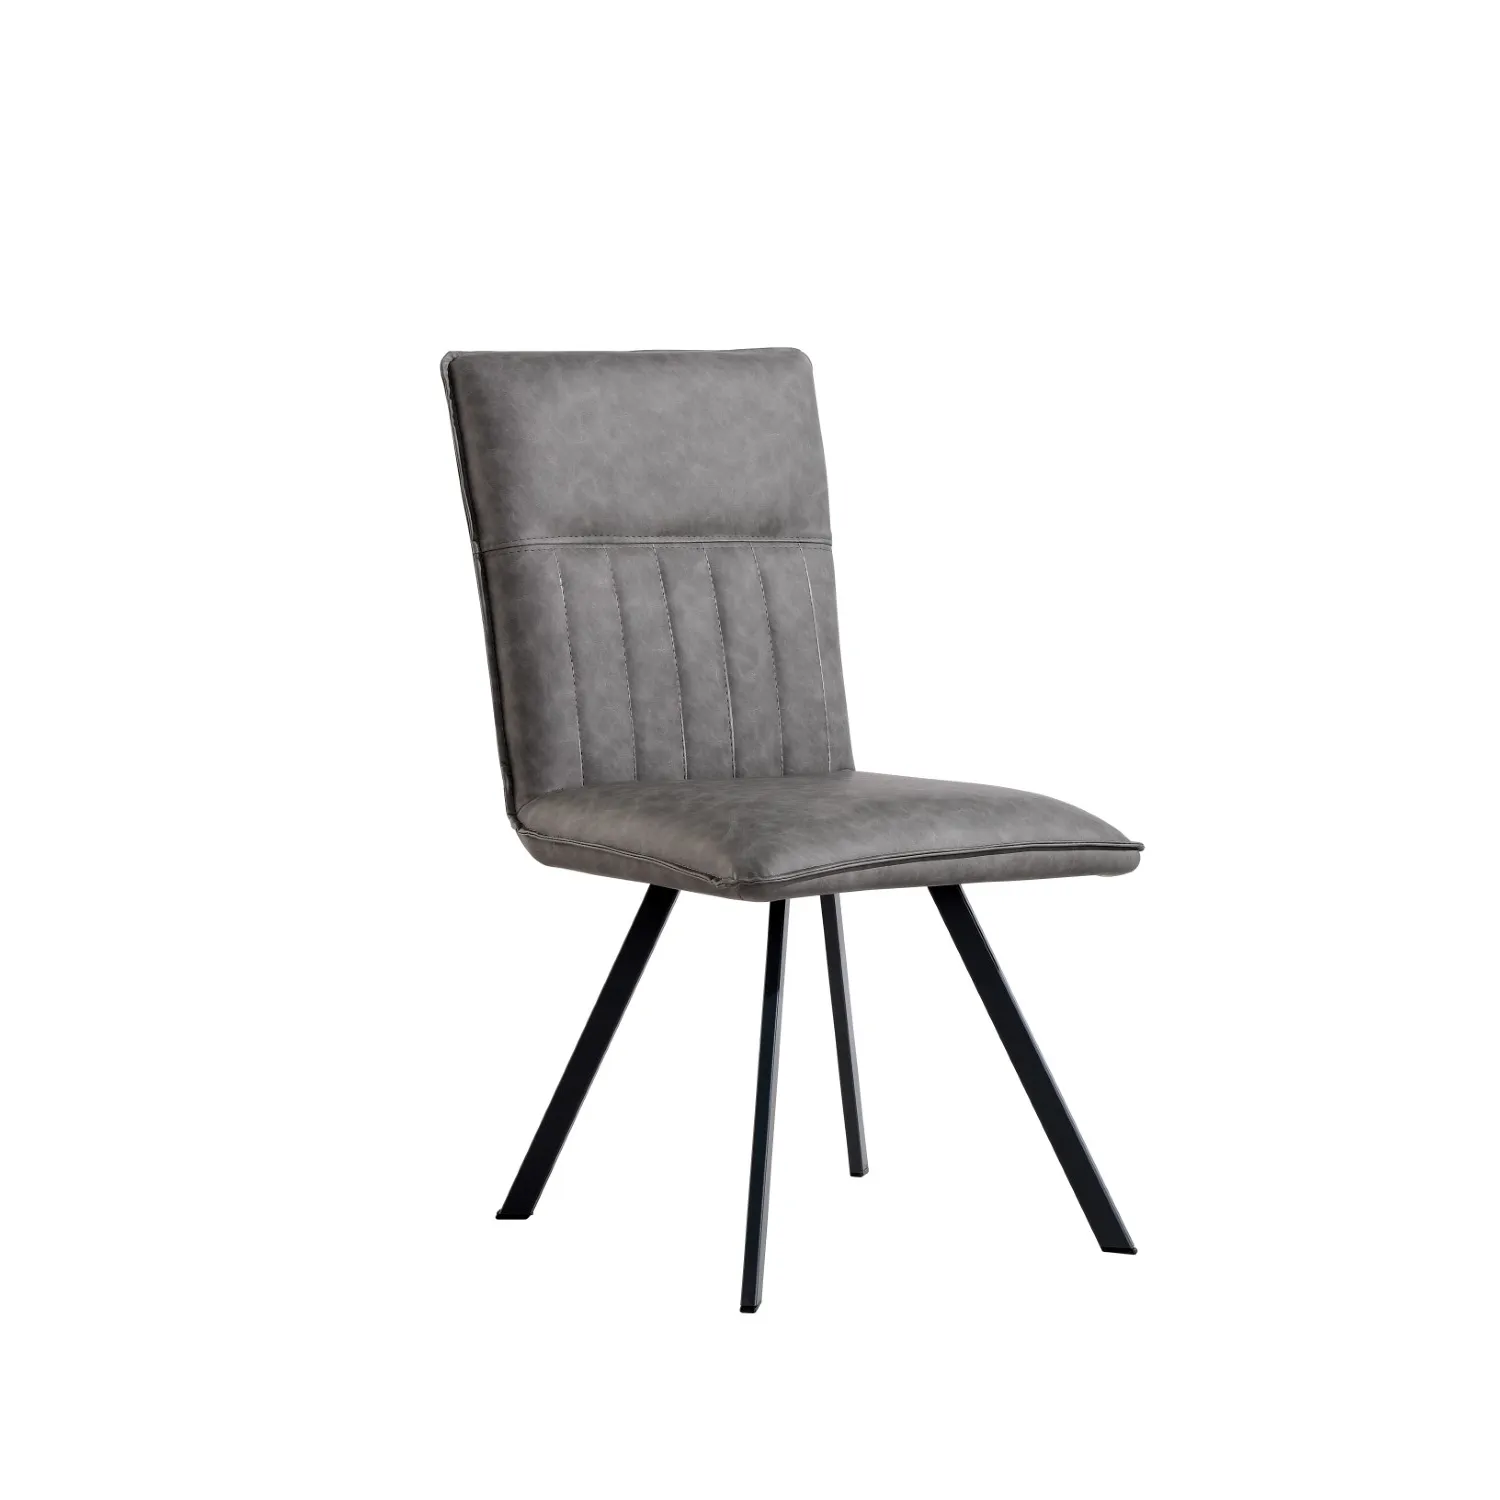 Grey Leather Dining Chair Black Legs